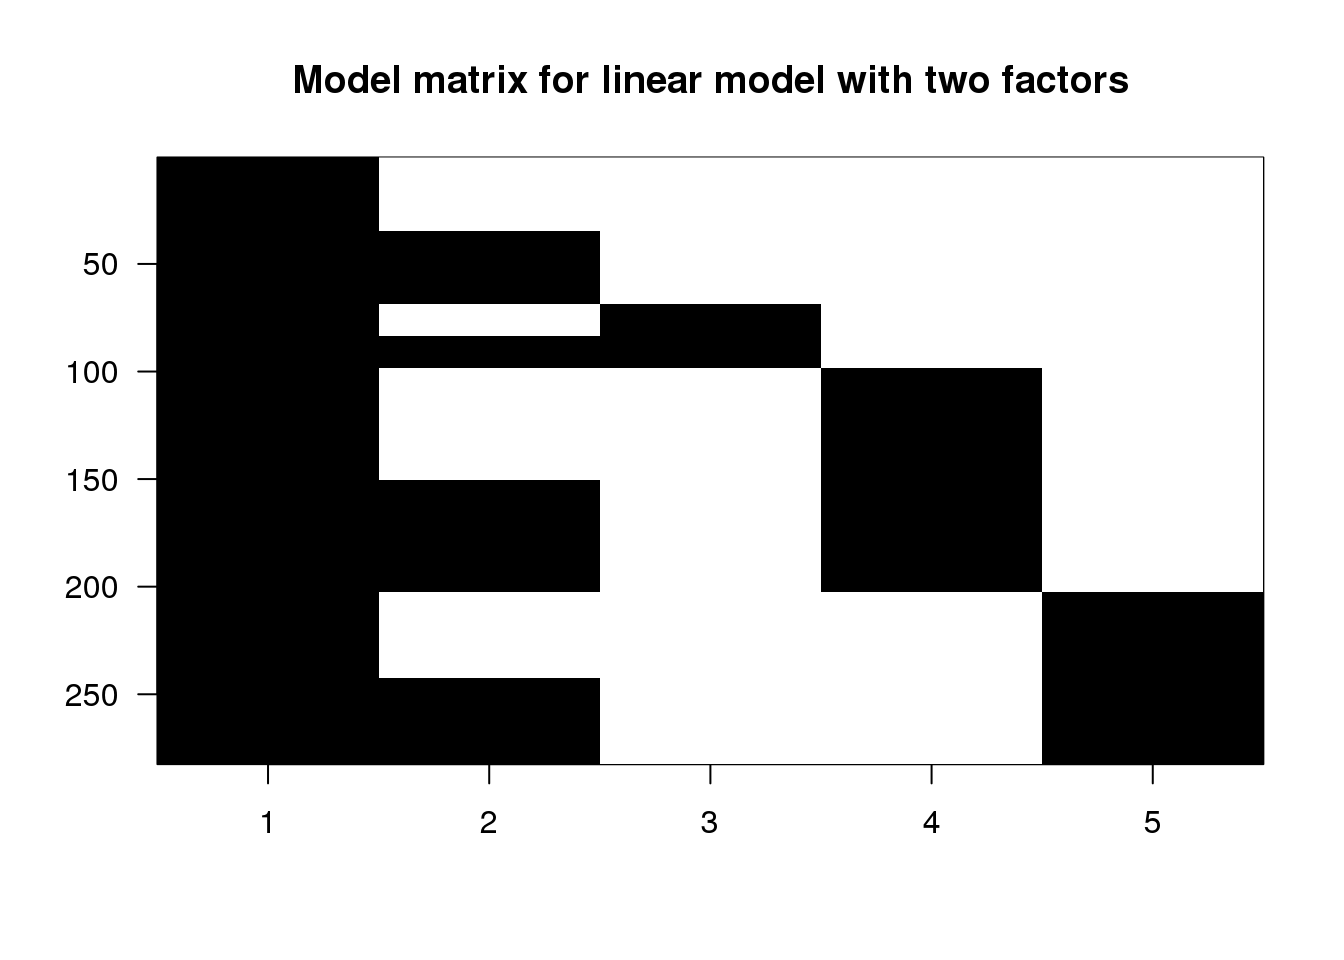 Image of the model matrix for a formula with type + leg